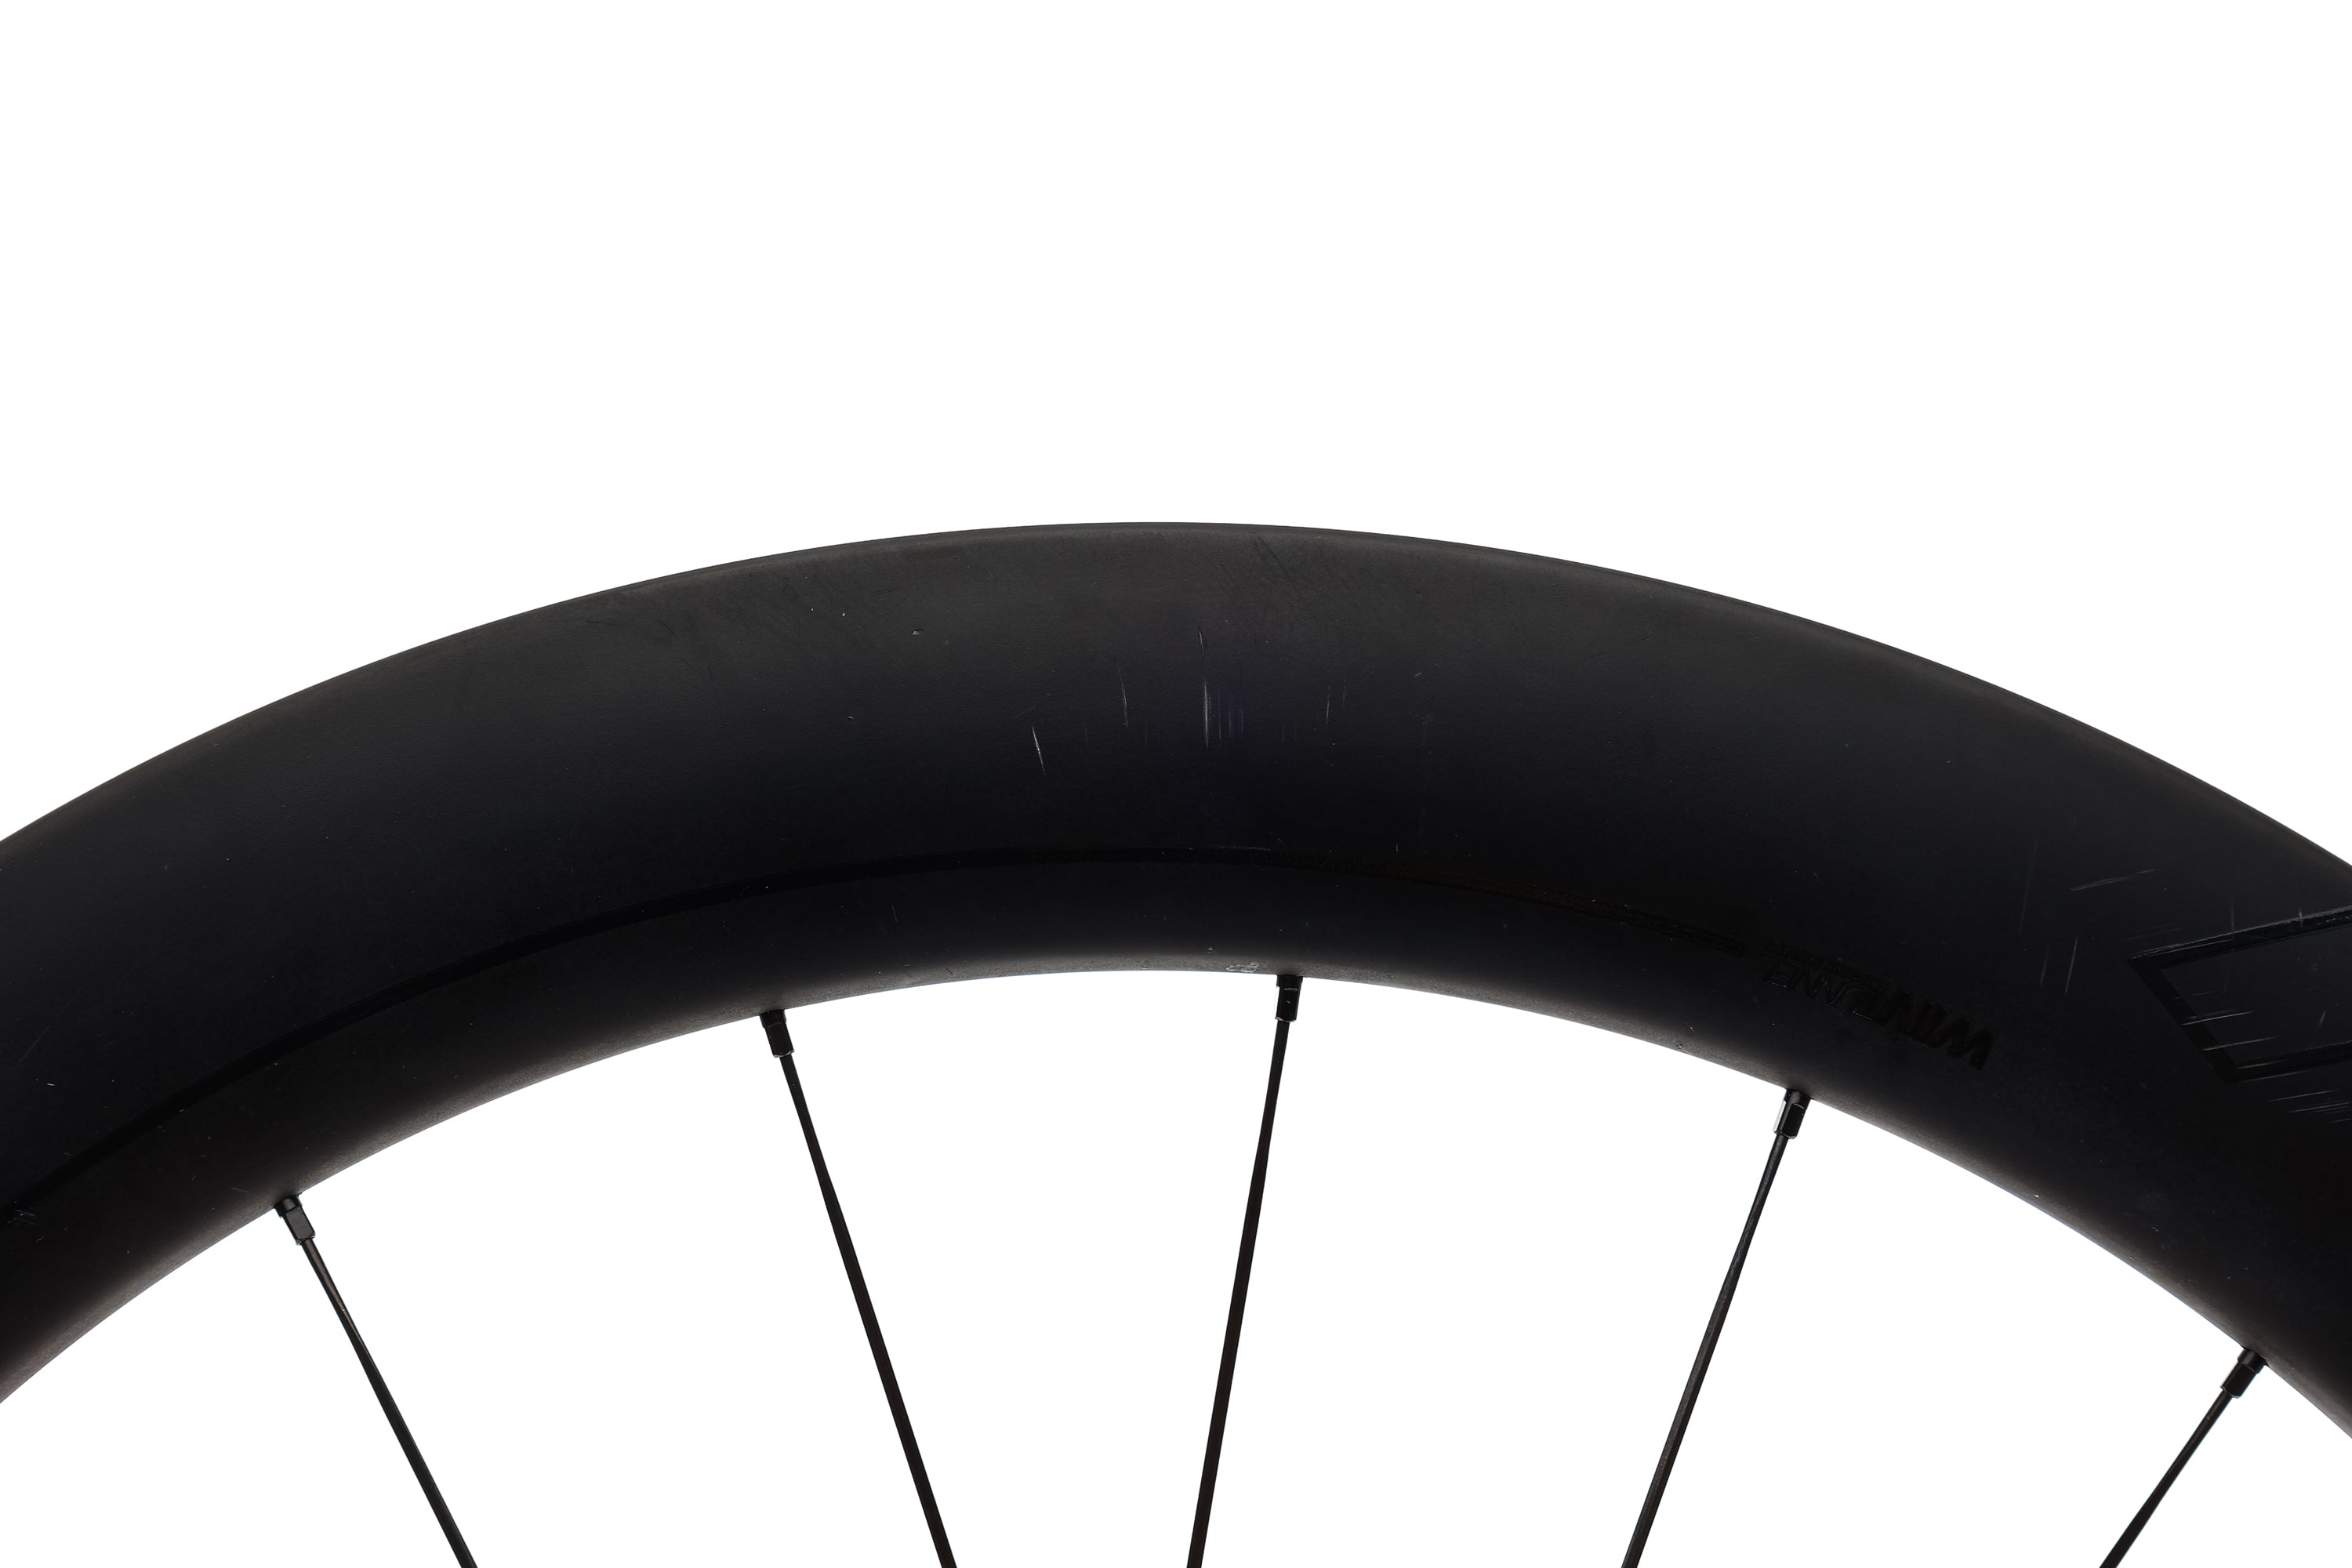 Roval Rapide CLX 64 Disc Carbon Tubeless 700c Wh | The Pro's 